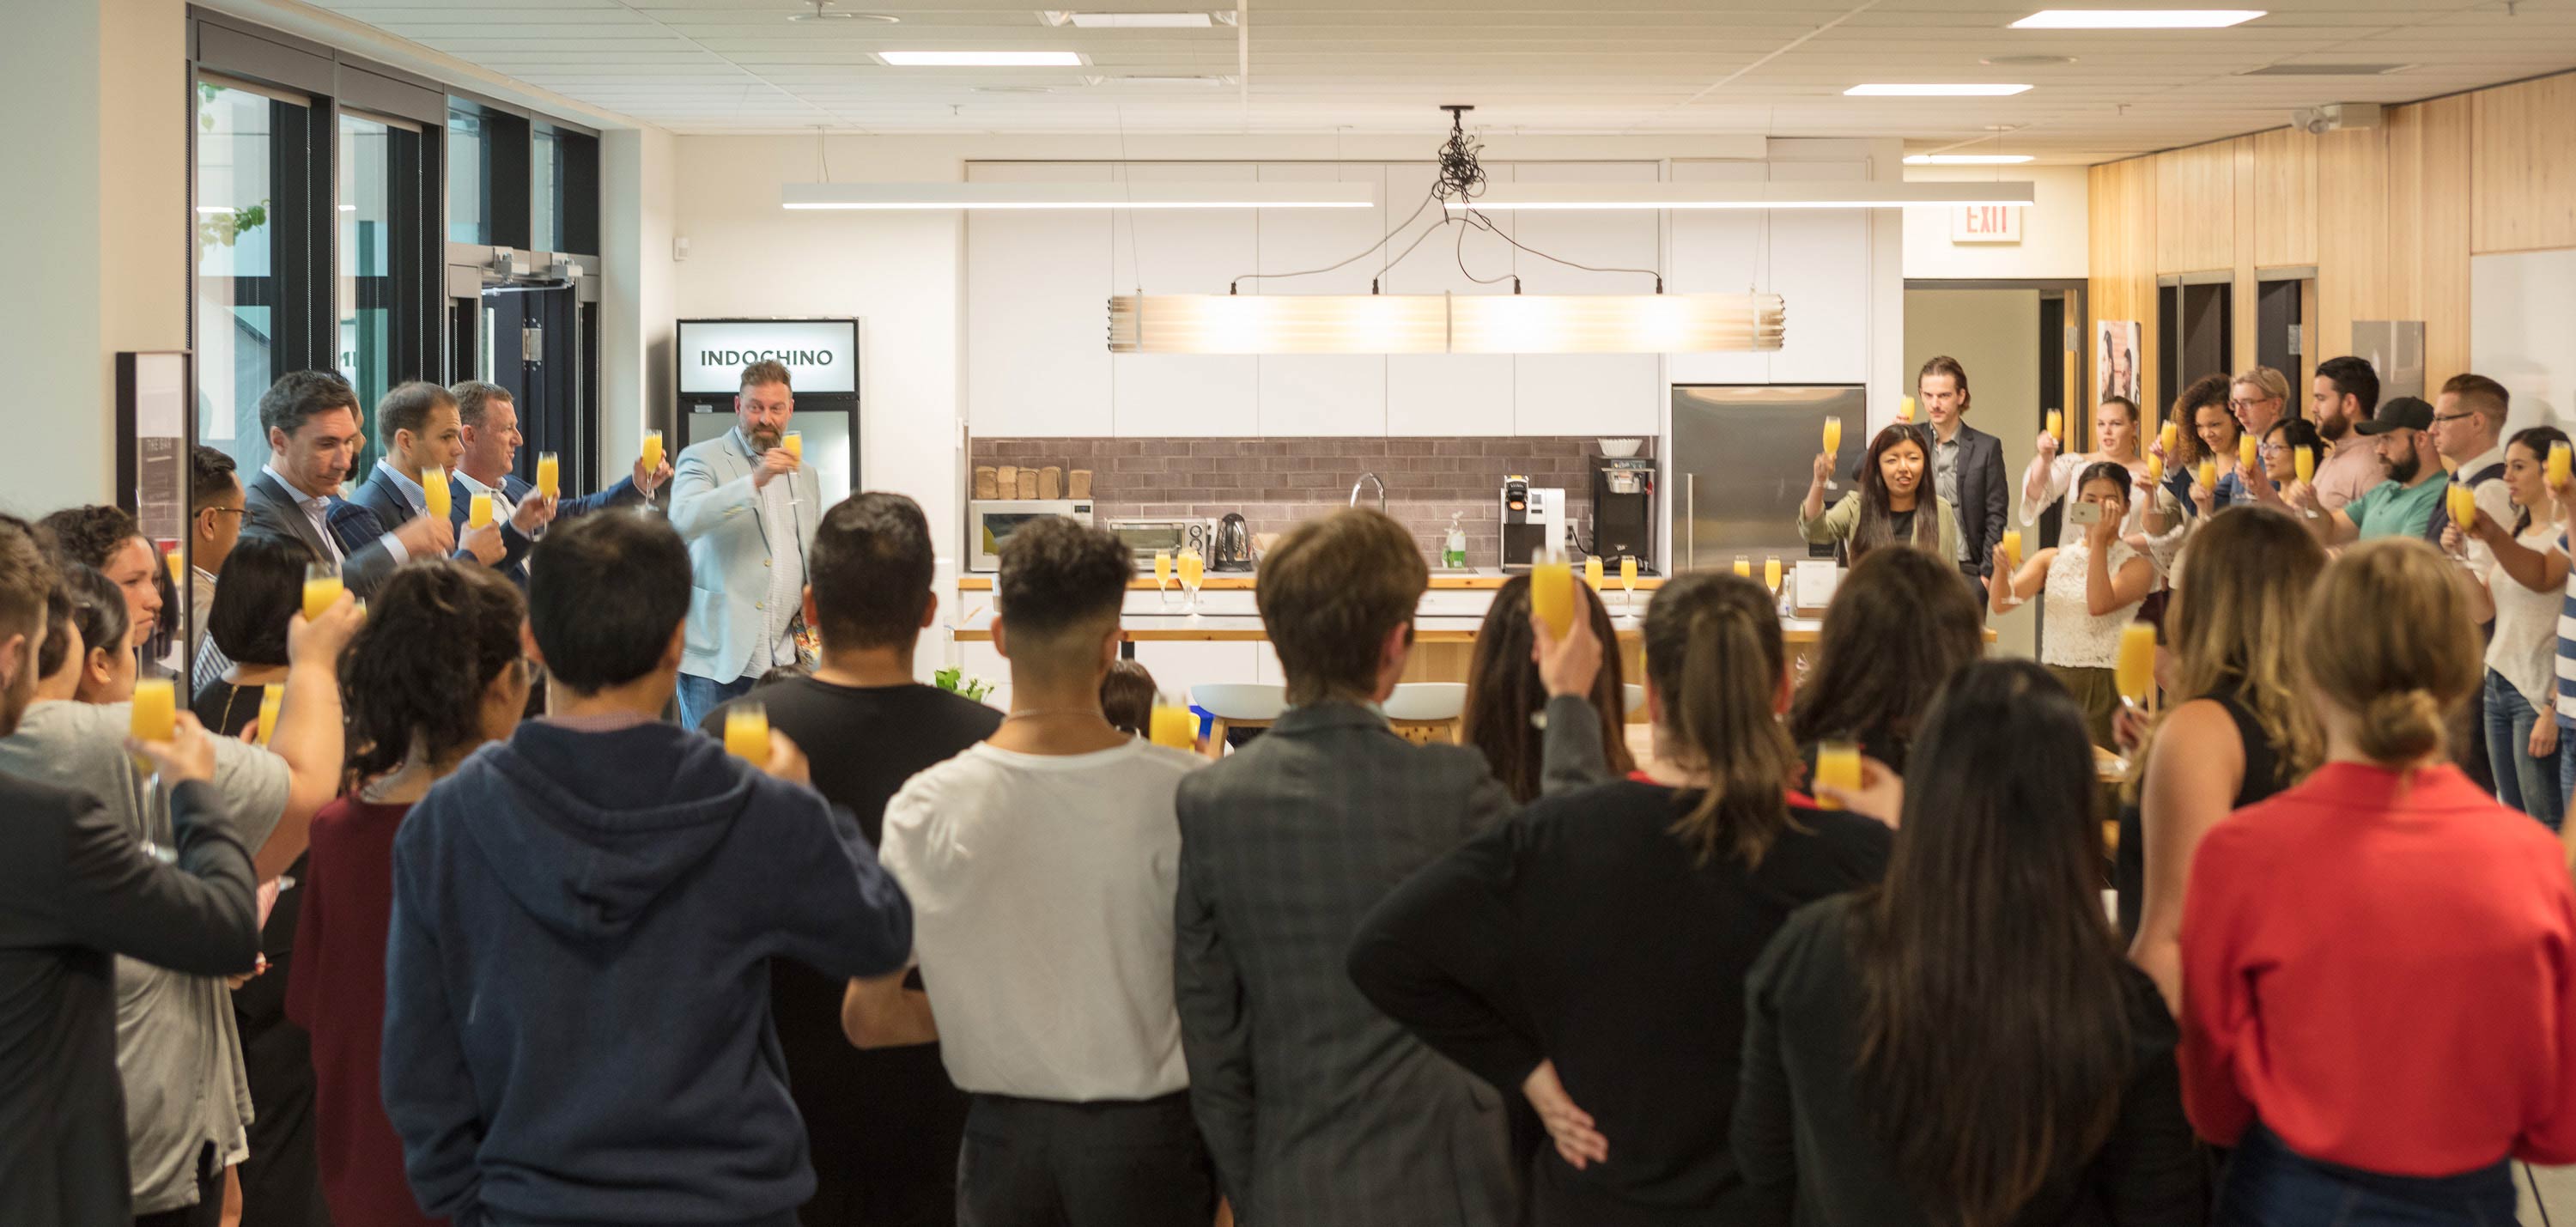 INDOCHINO employees raising a toast in the luchroom at headquarters.